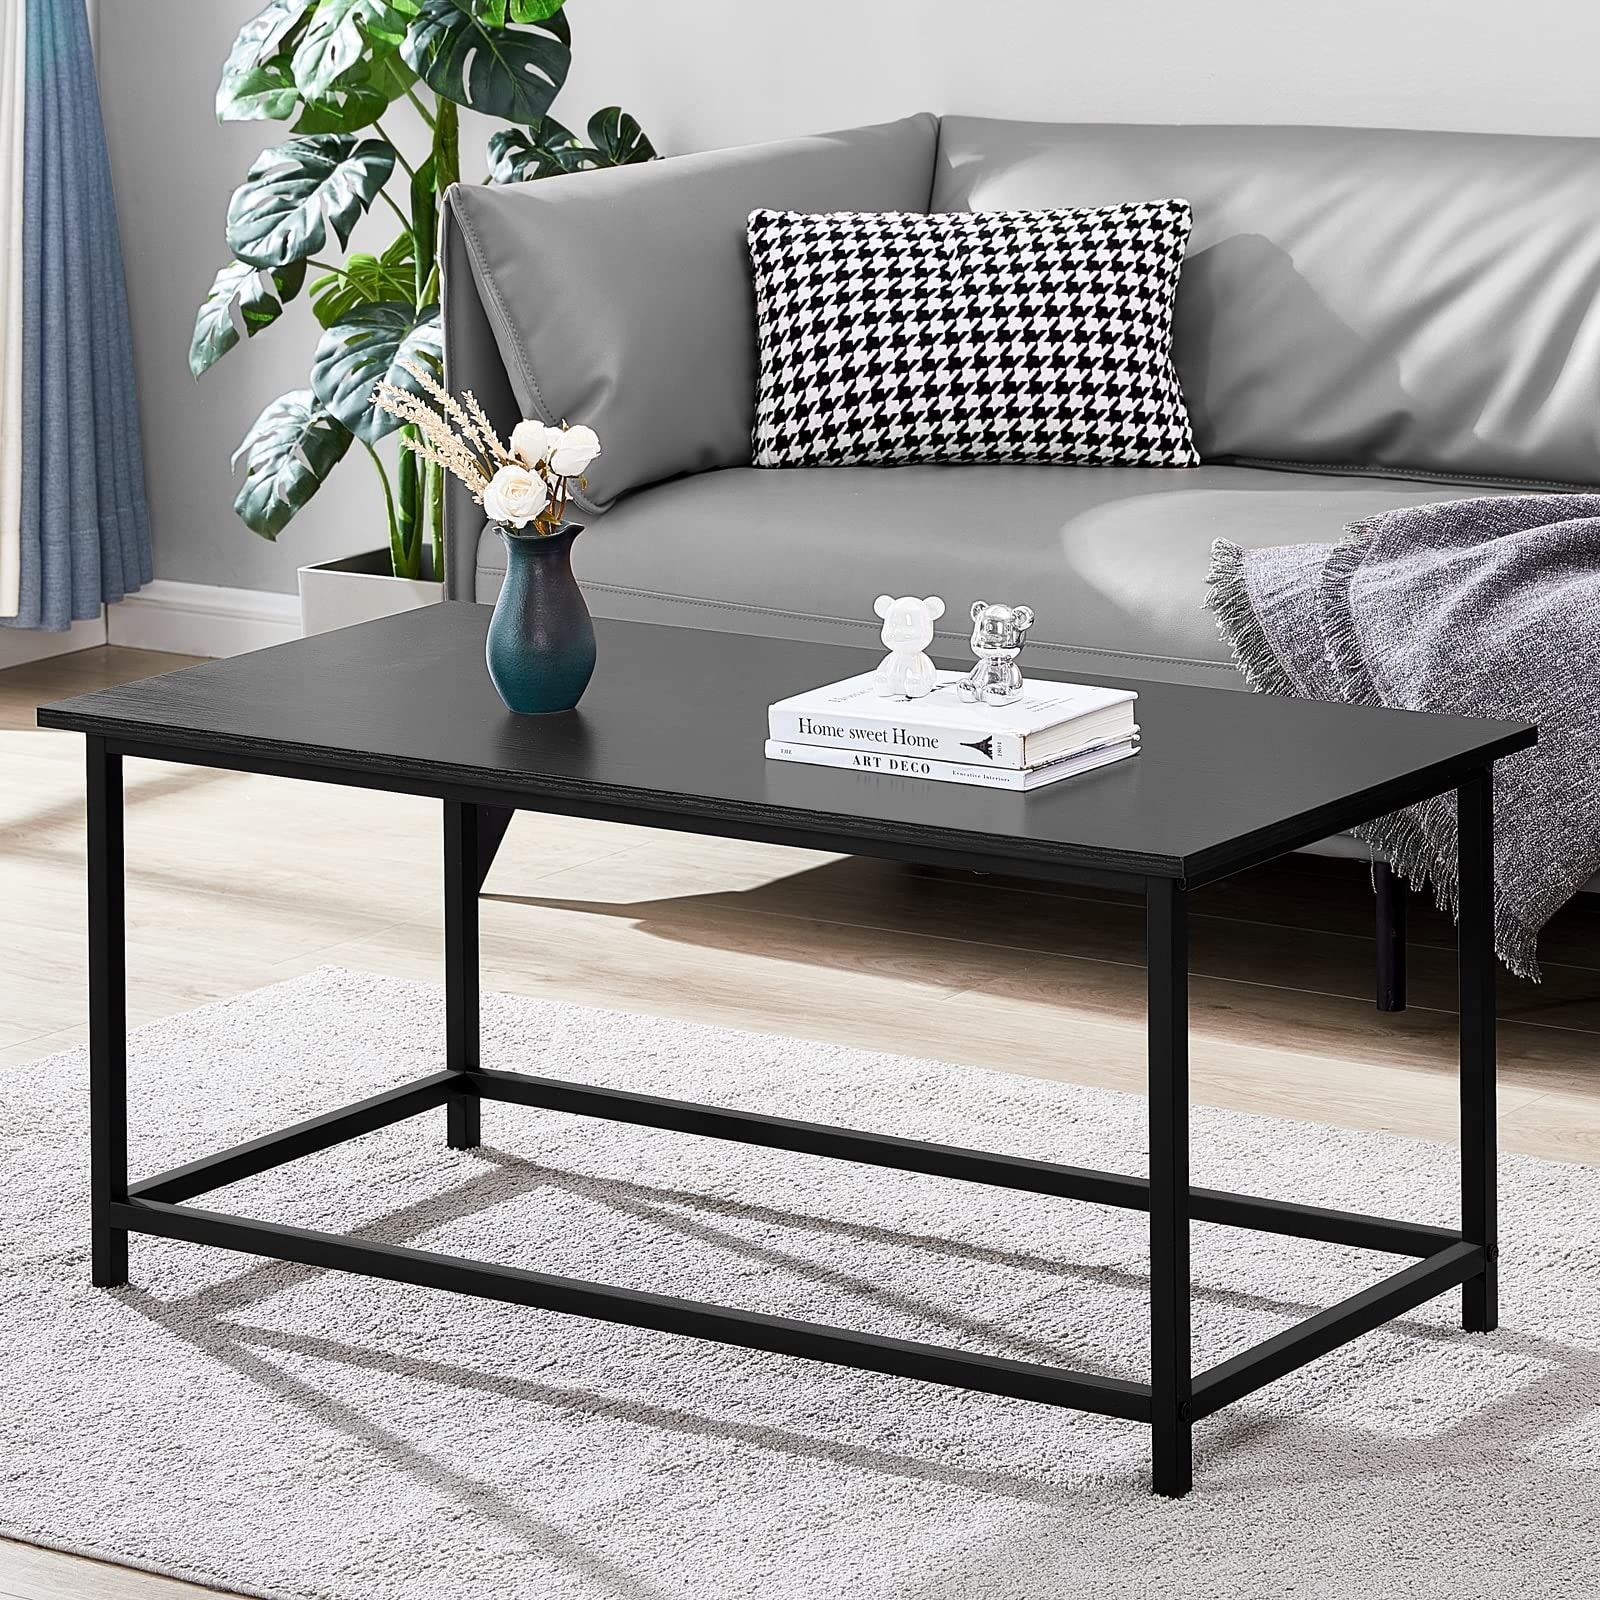 Black Coffee Table Simple Modern Coffee Tables Open Design Rectangular  Minimalist Center Table For Living Room Home – Bed Bath & Beyond – 37499272 In Simple Design Coffee Tables (View 9 of 15)